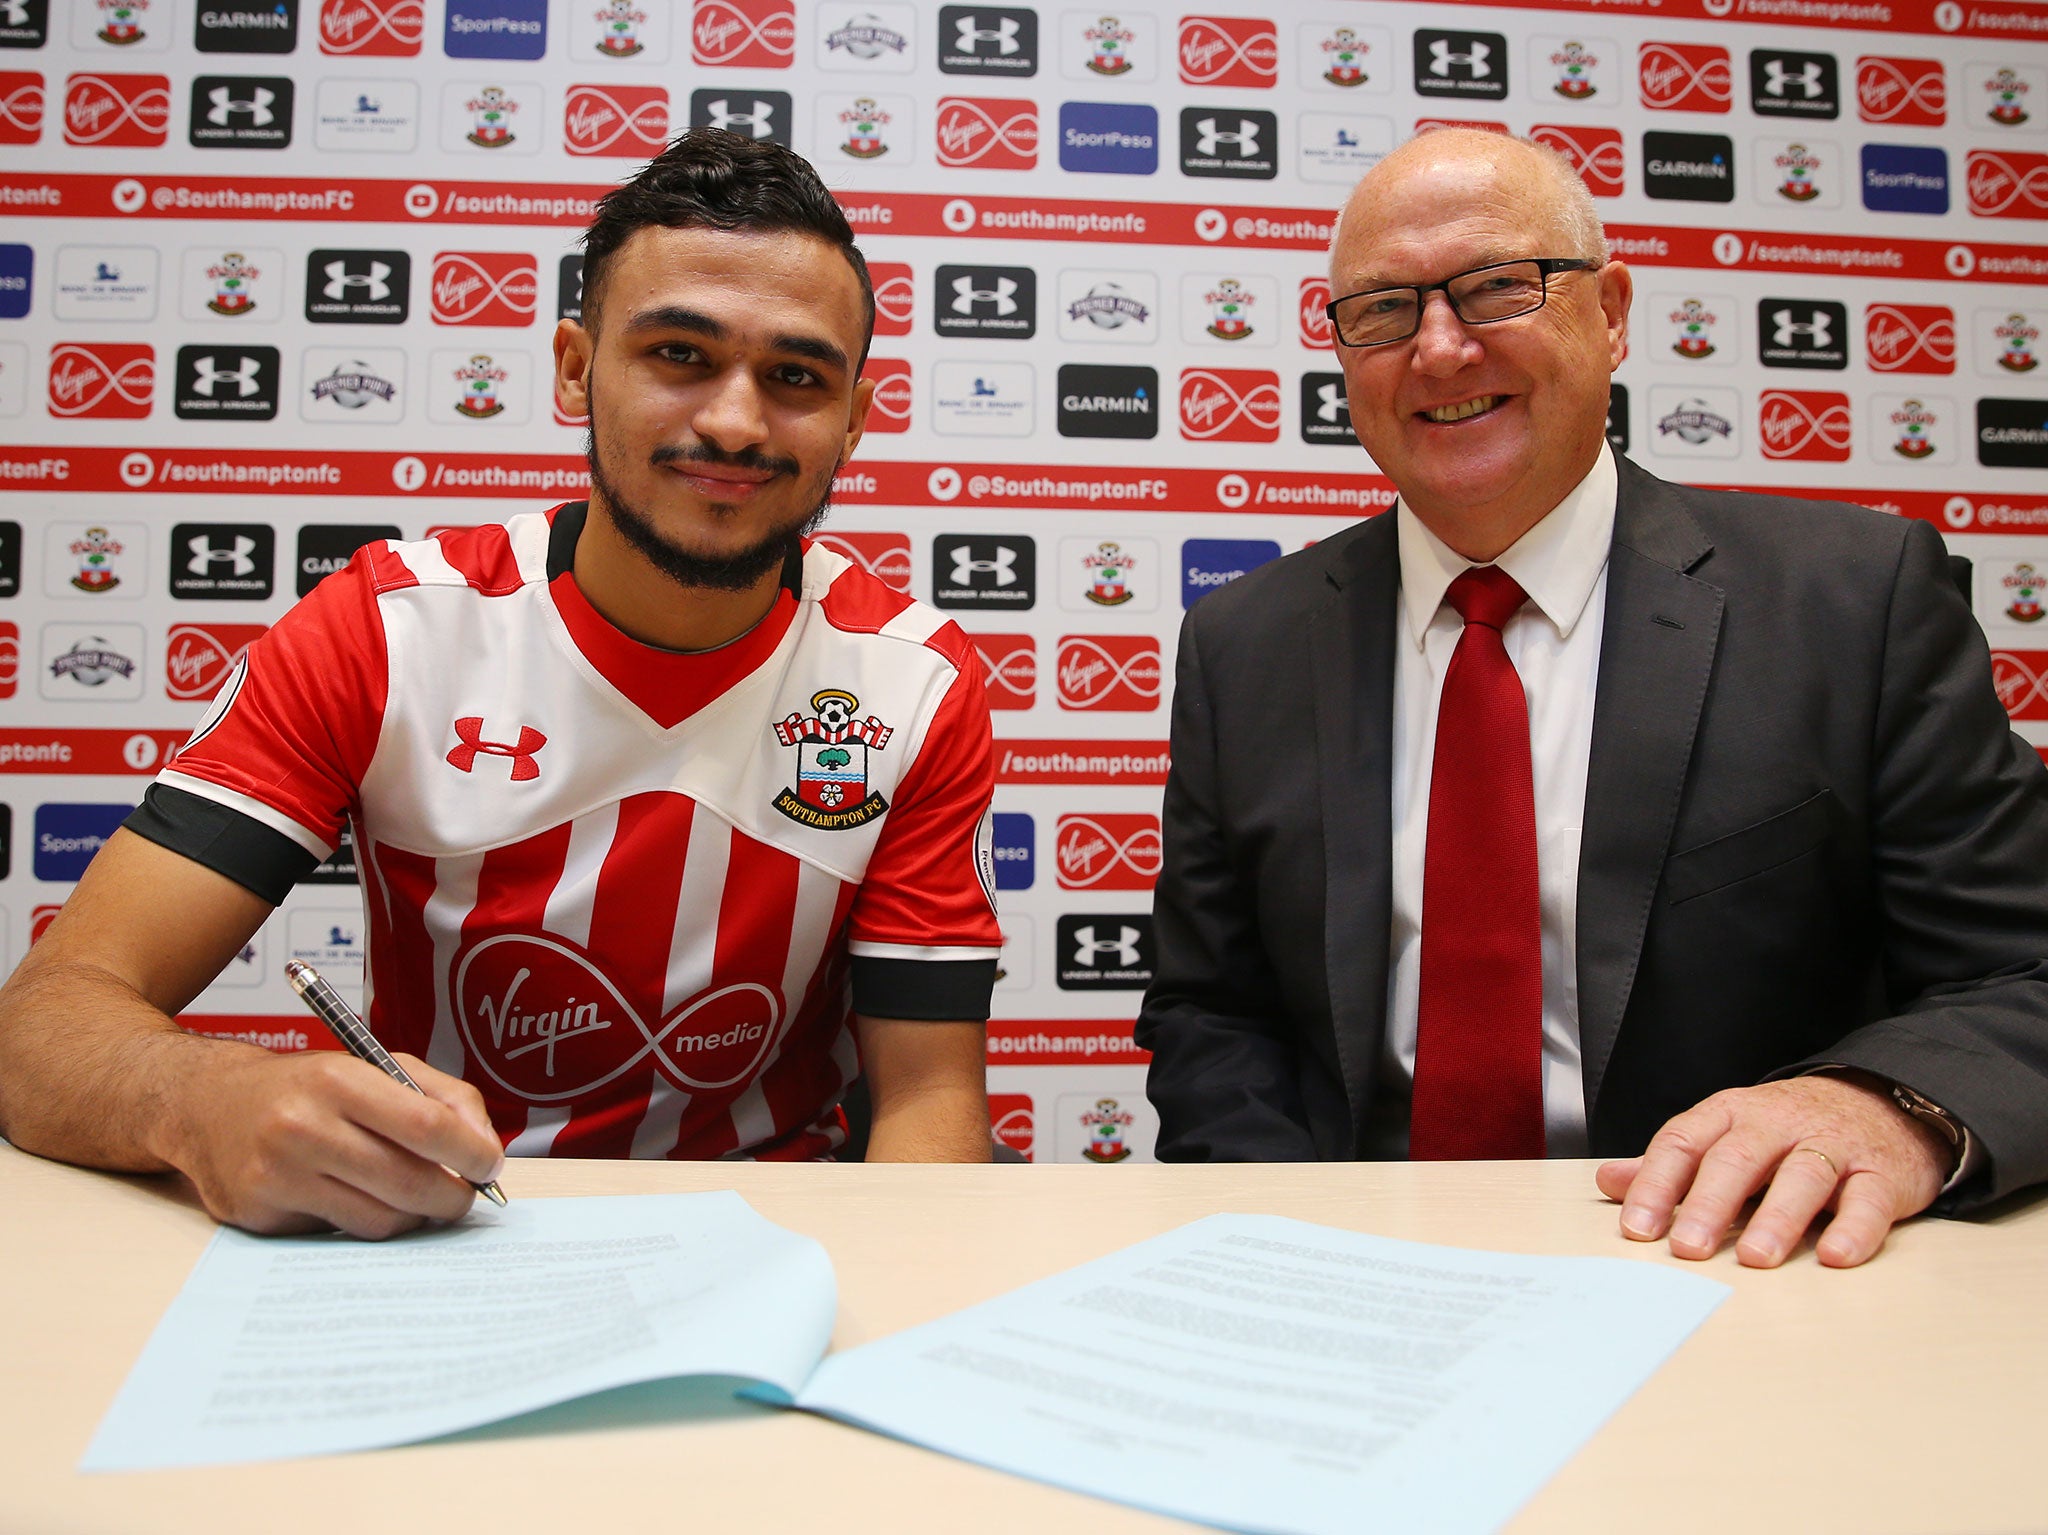 Sofiane Boufal has signed a five-year contract with Southampton